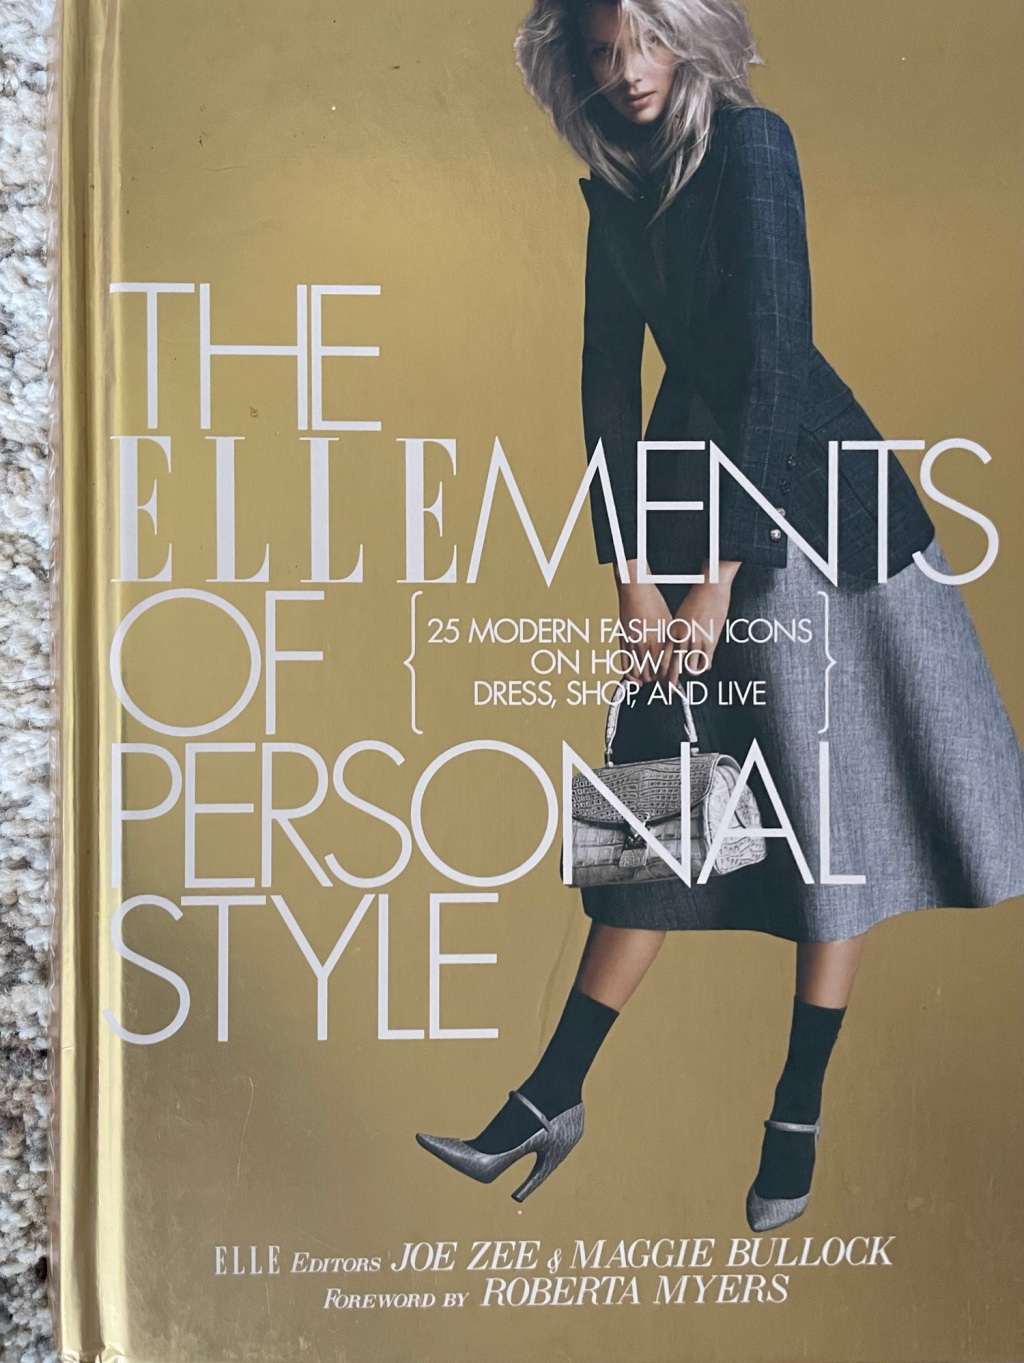 What’s on My Fashion Bookshelf: The Ellements of Personal Style